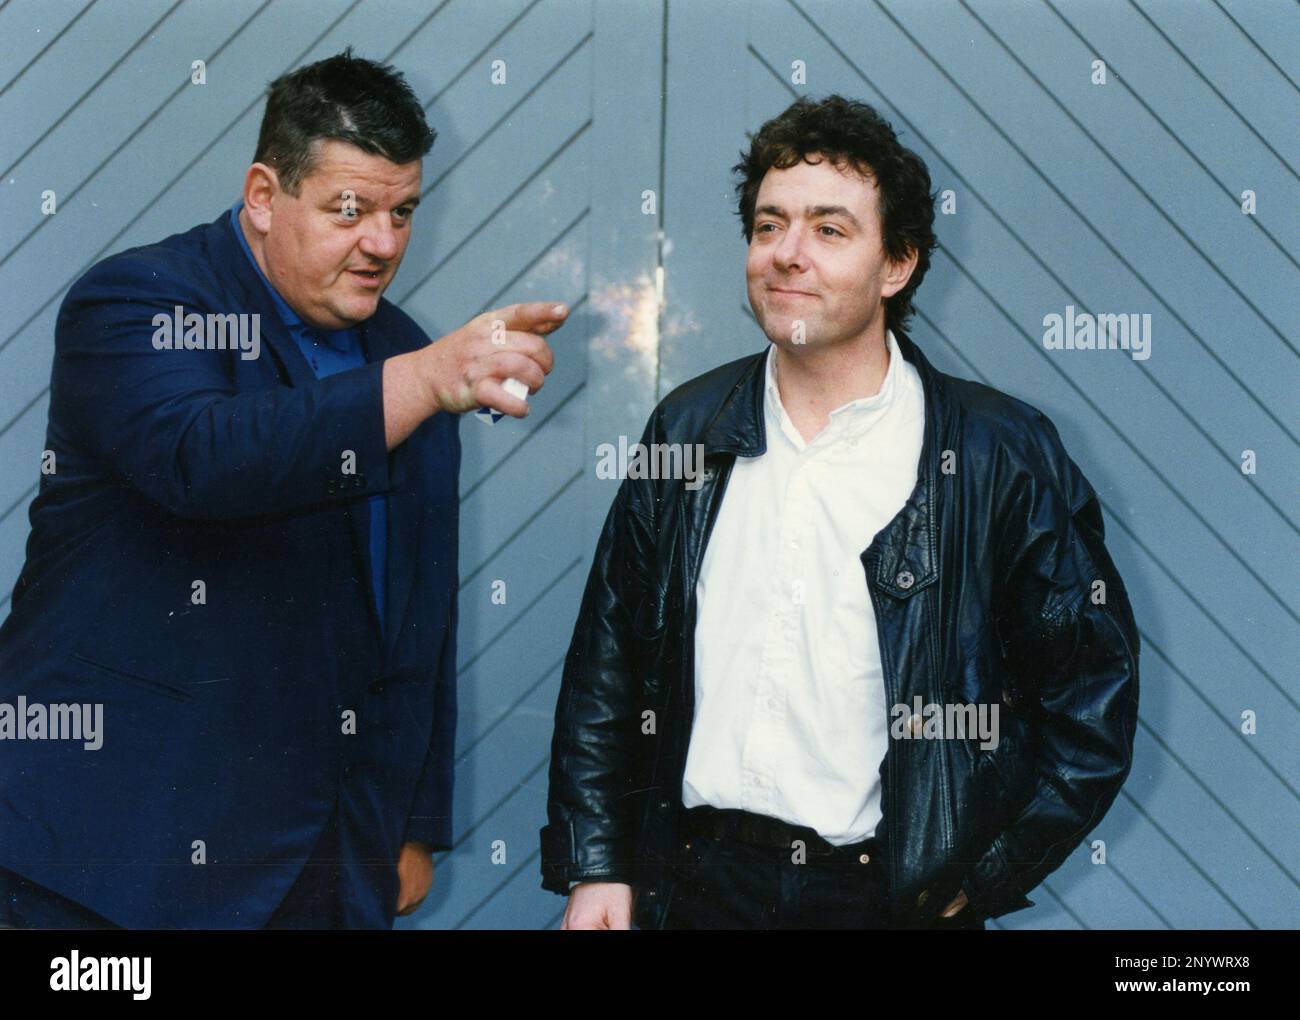 British actors and comedians Robbie Coltrane and John Sessions, UK 1993 Stock Photo